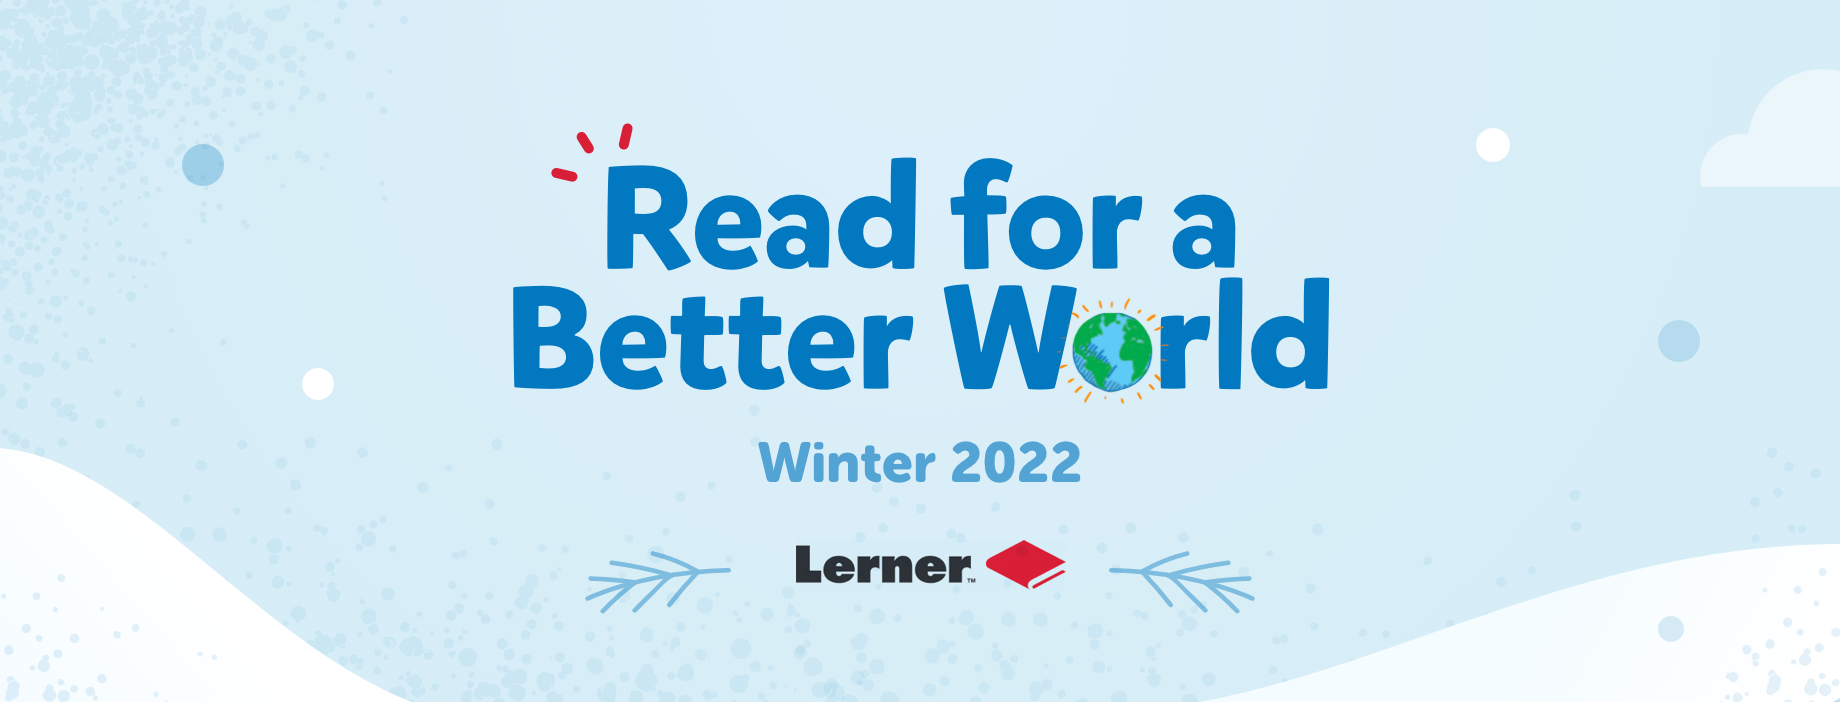 Read for a Better World: Winter 2022 (Lerner)